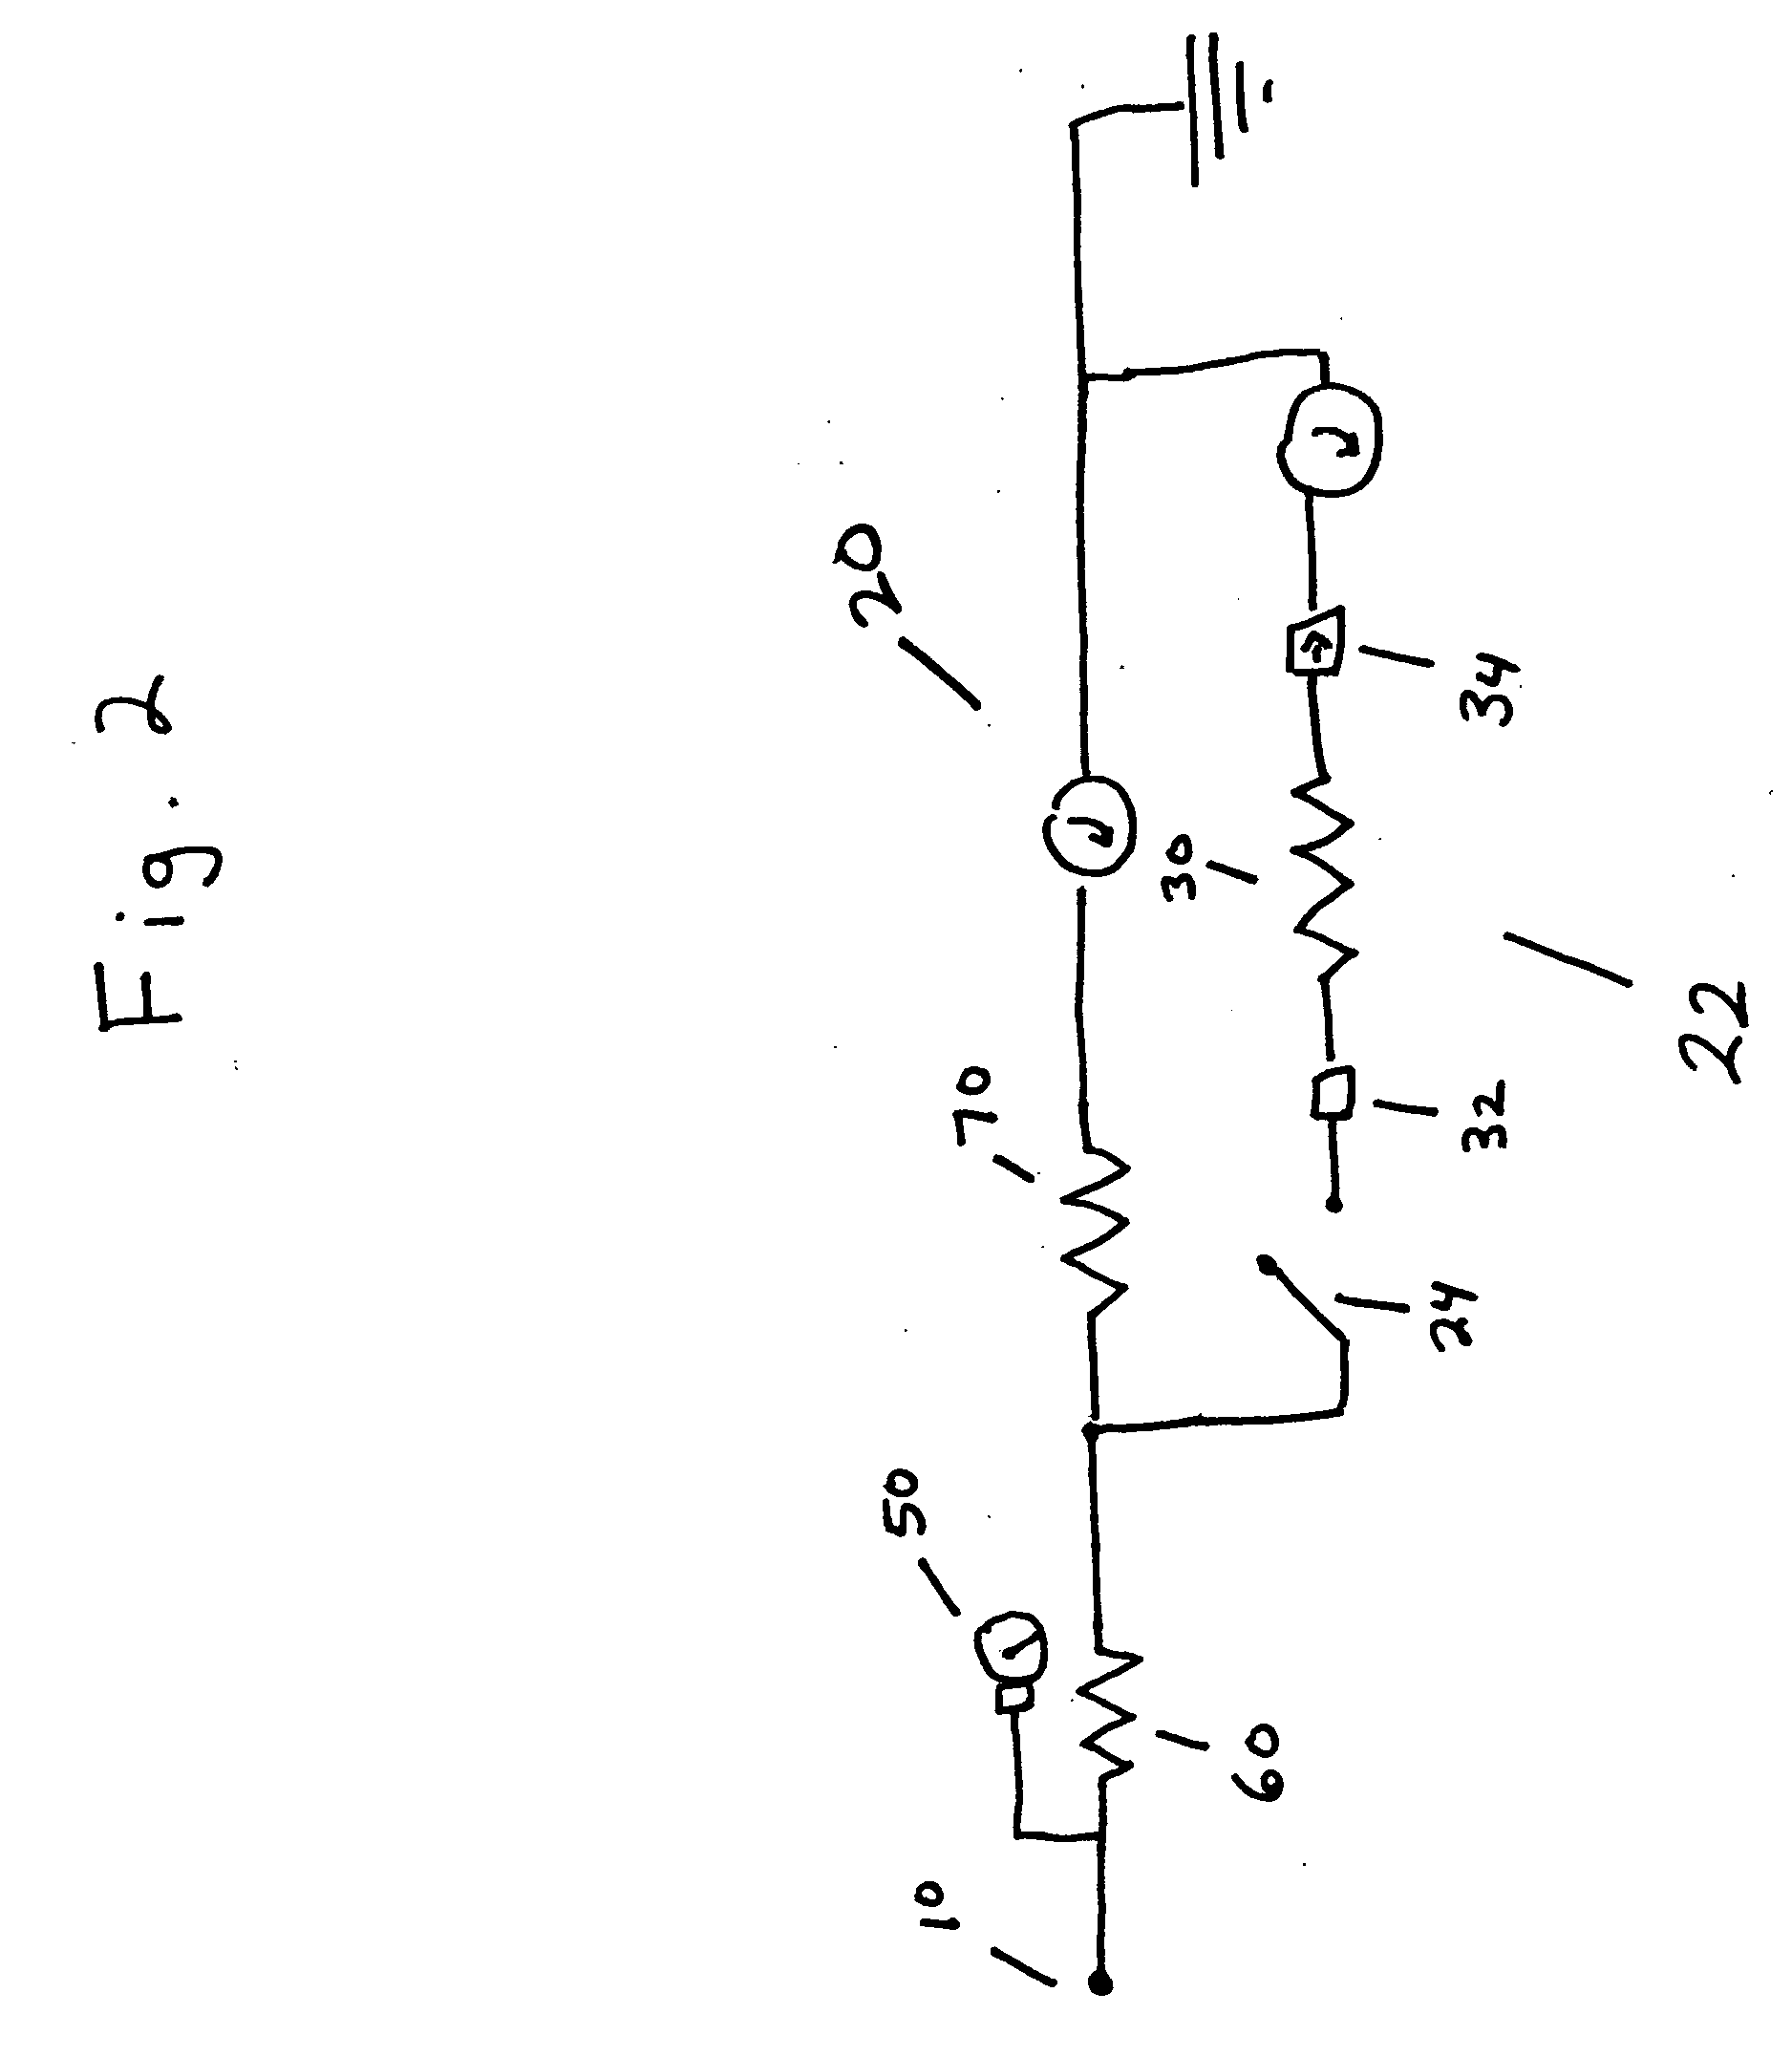 System and method for controlling the flow of exhaled breath during analysis